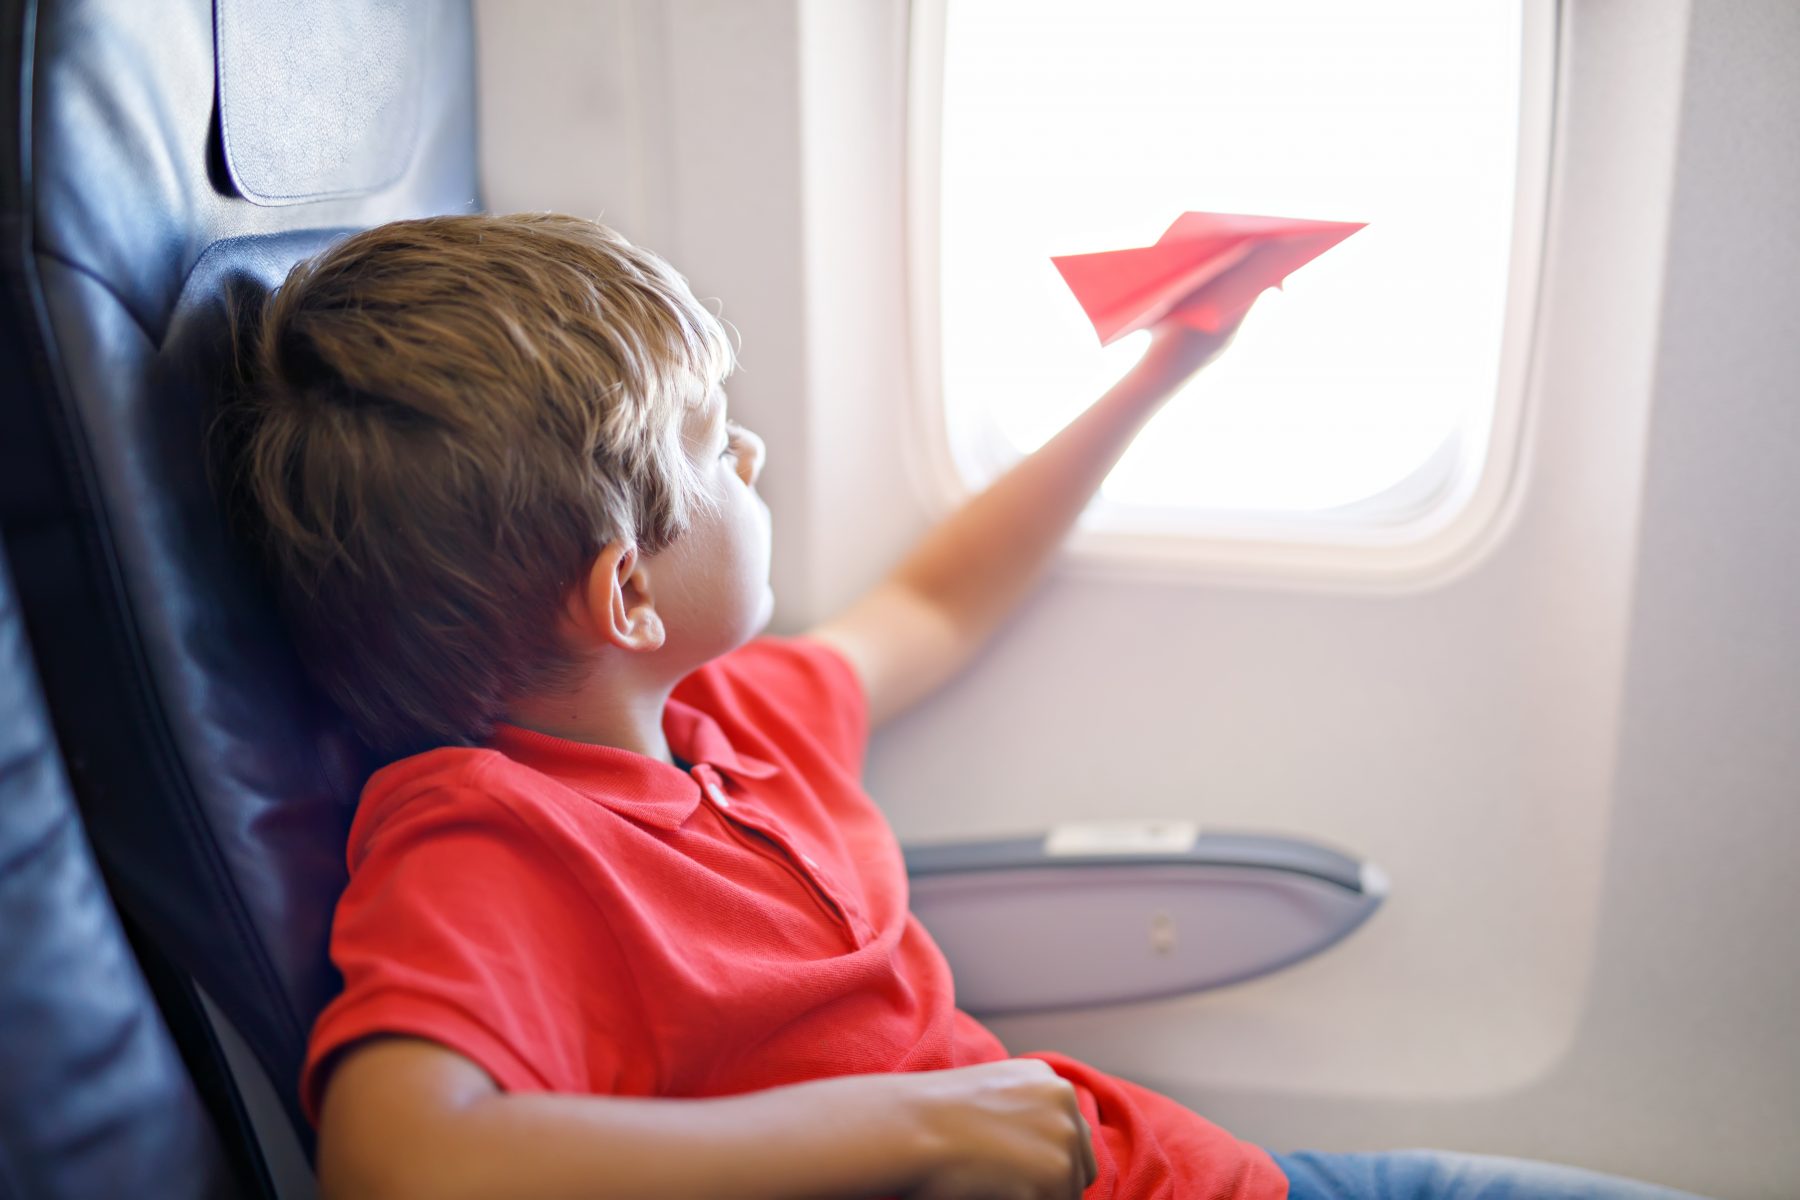 southwest airlines travel with minors